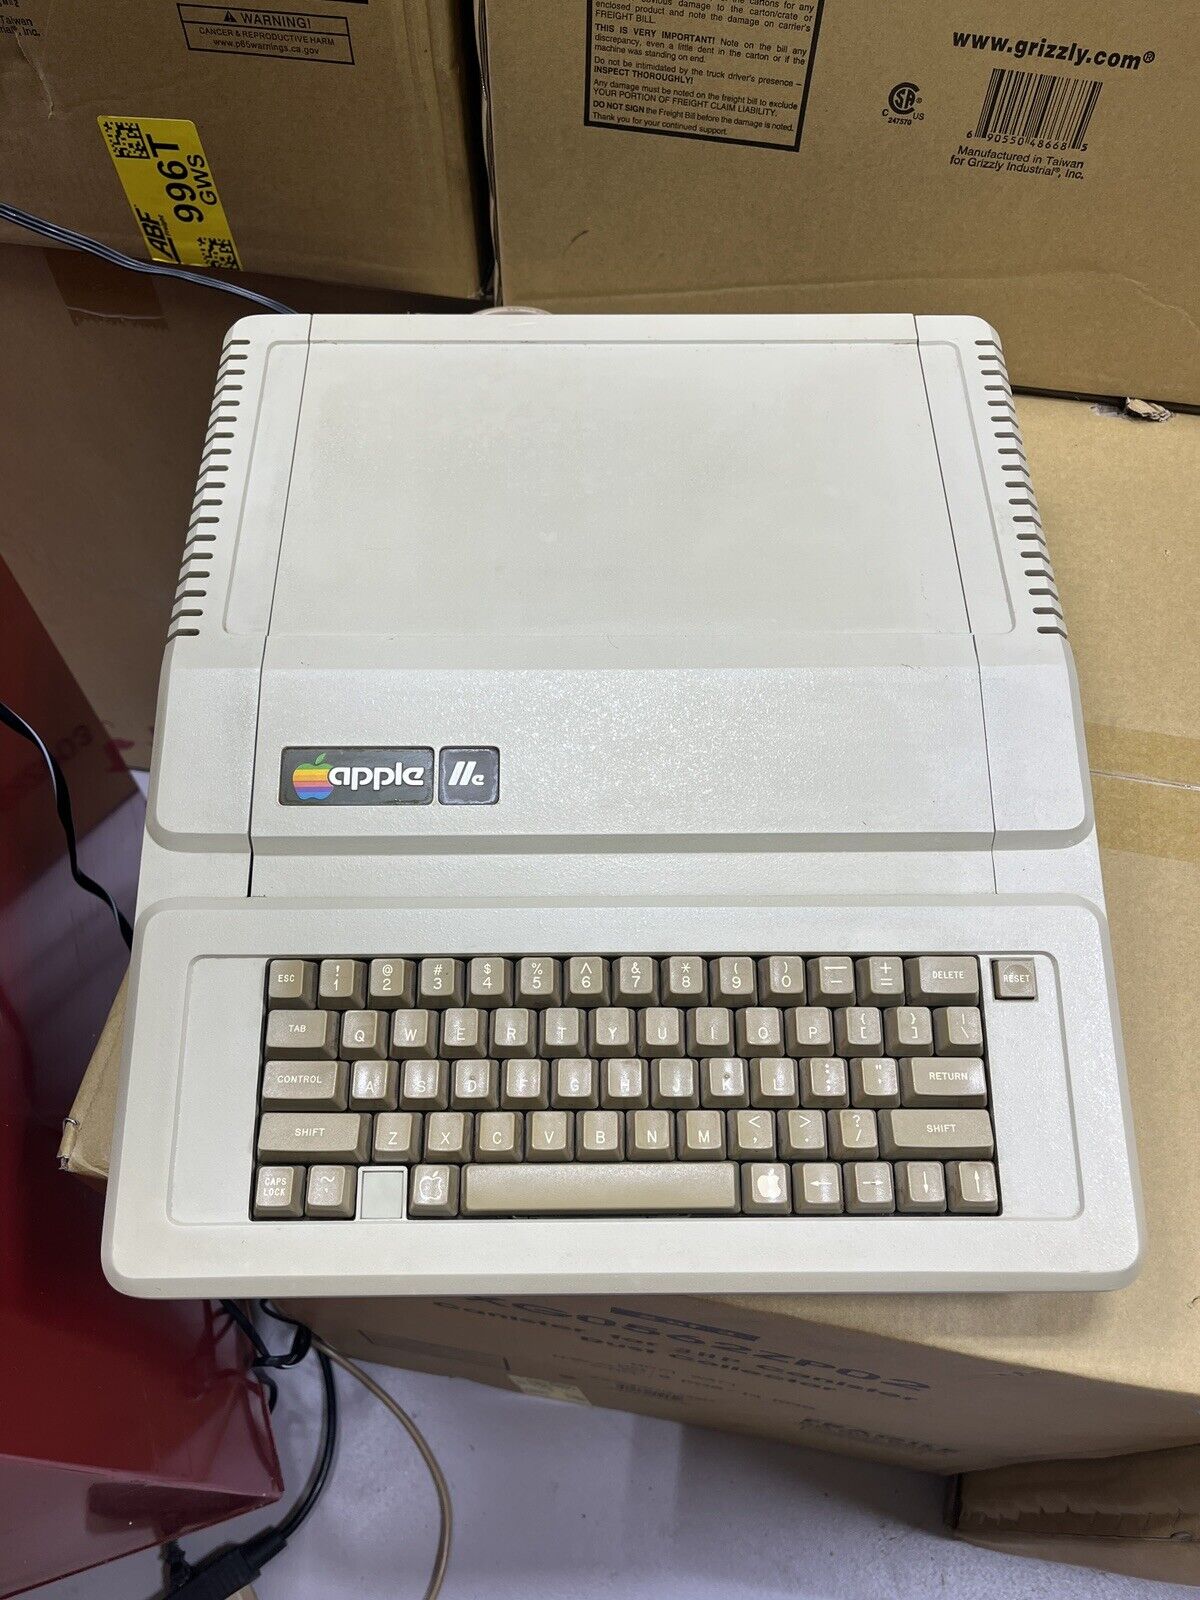 Apple IIe A2S2064 Vintage Personal Computer